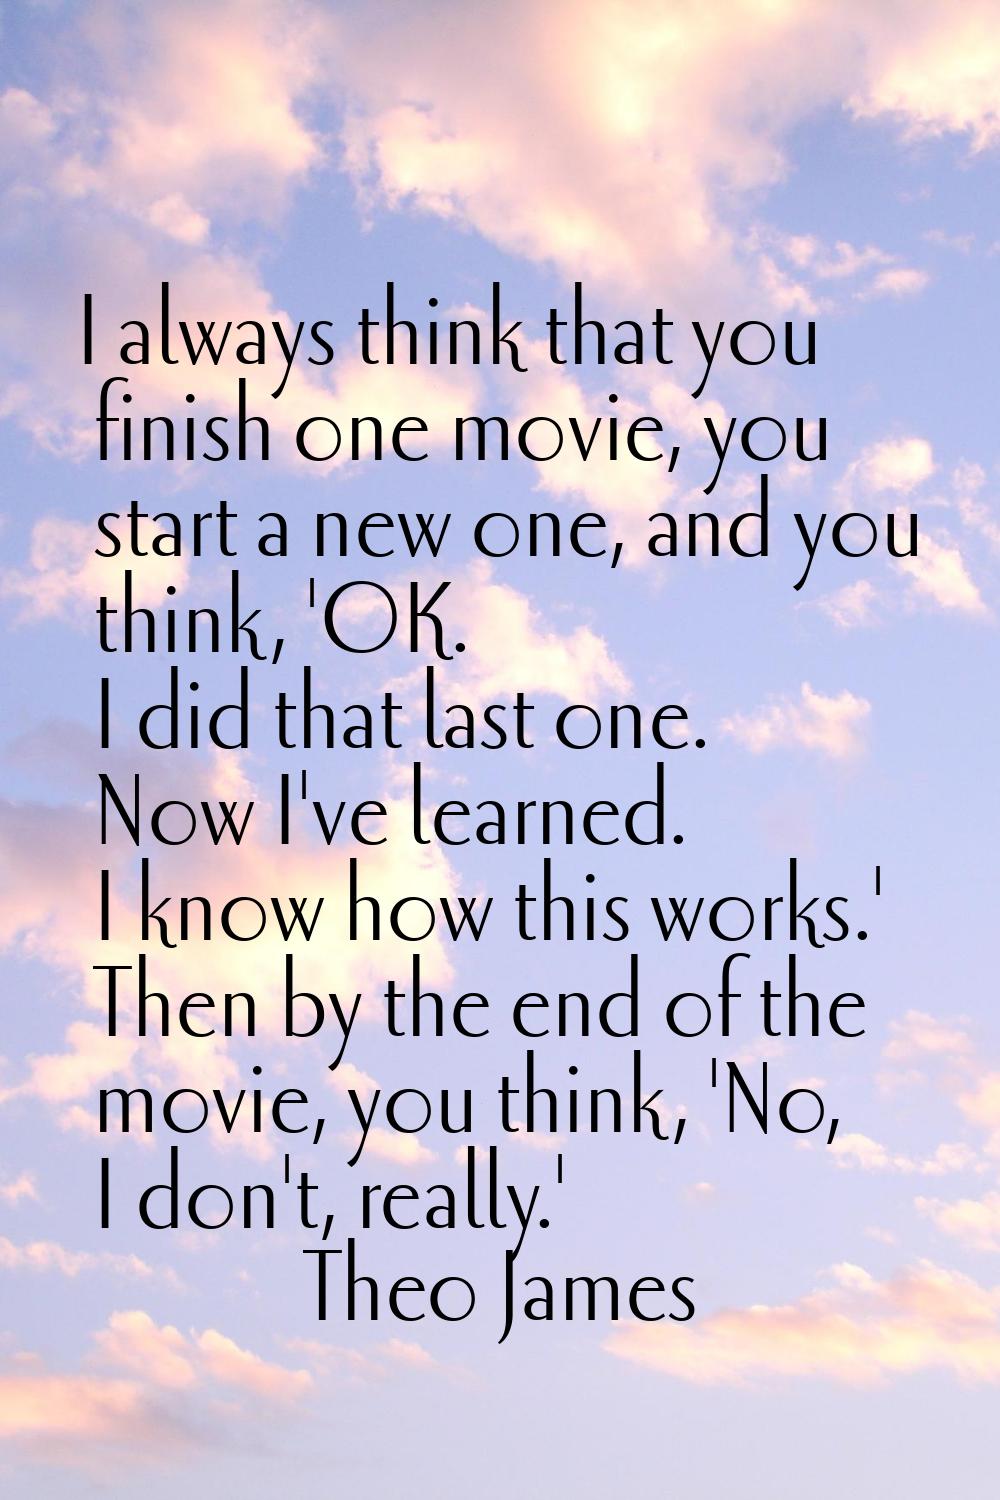 I always think that you finish one movie, you start a new one, and you think, 'OK. I did that last 